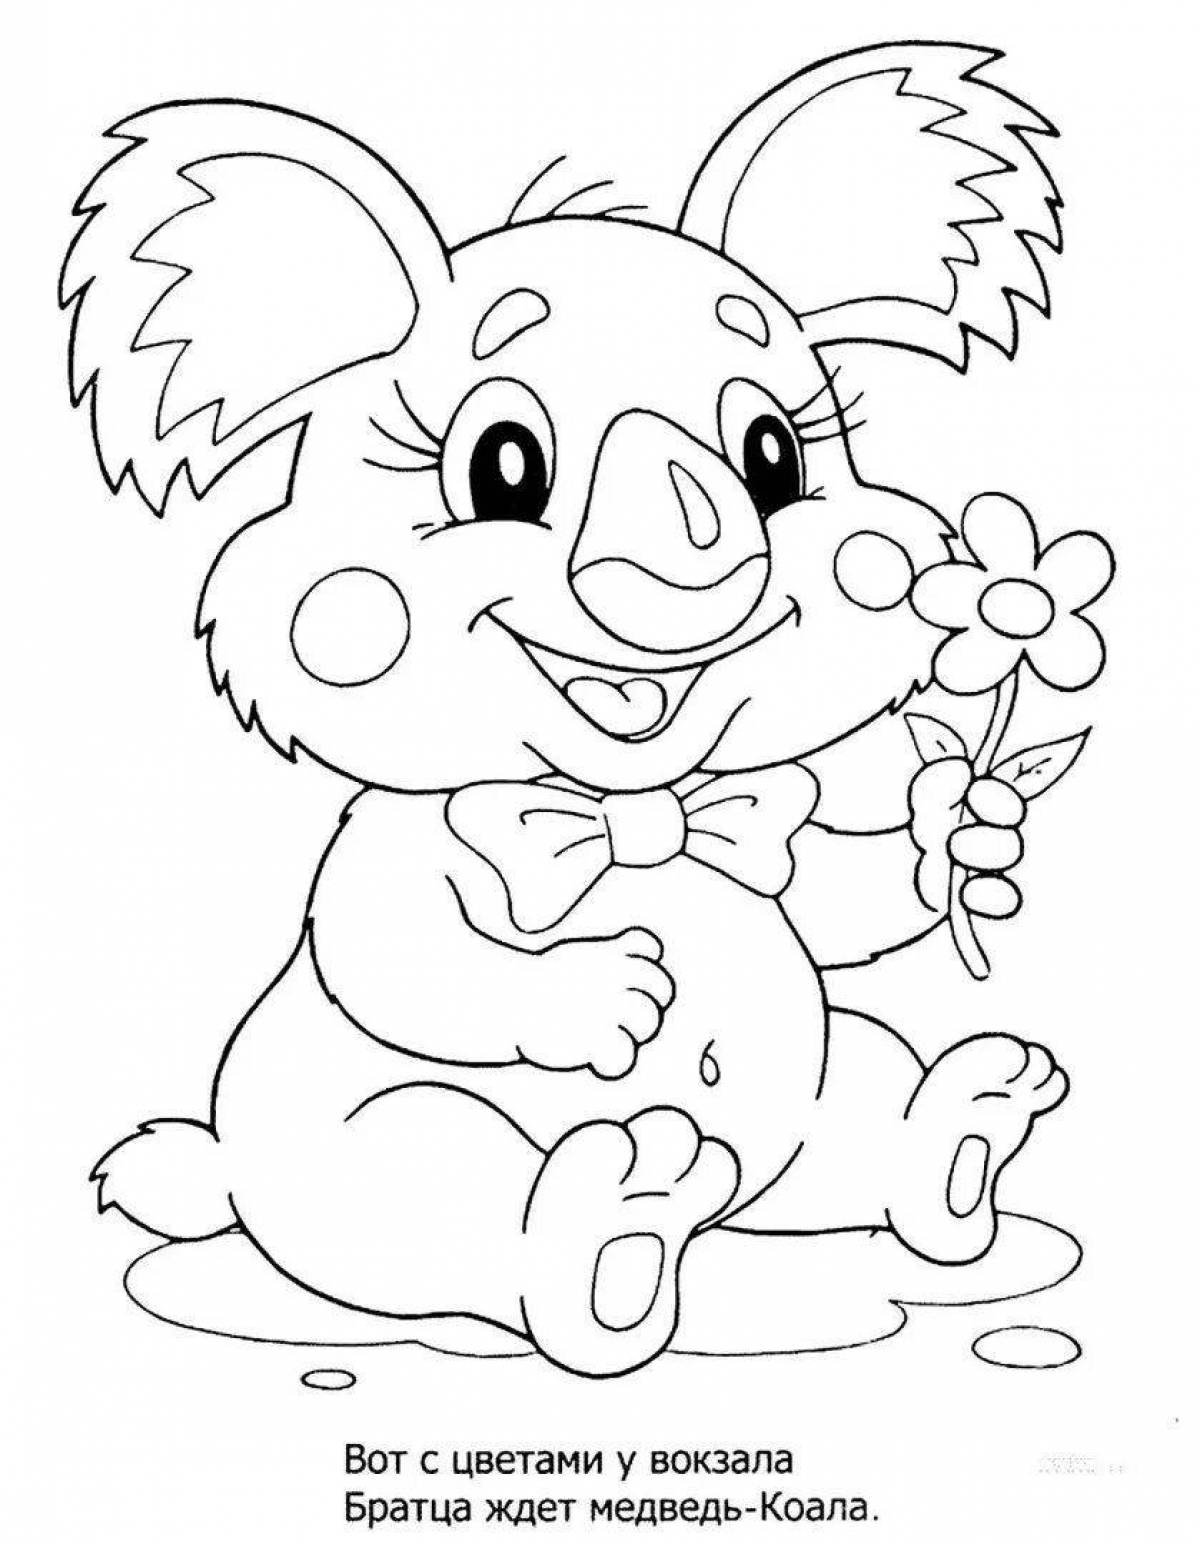 Exciting animal coloring pages for kids